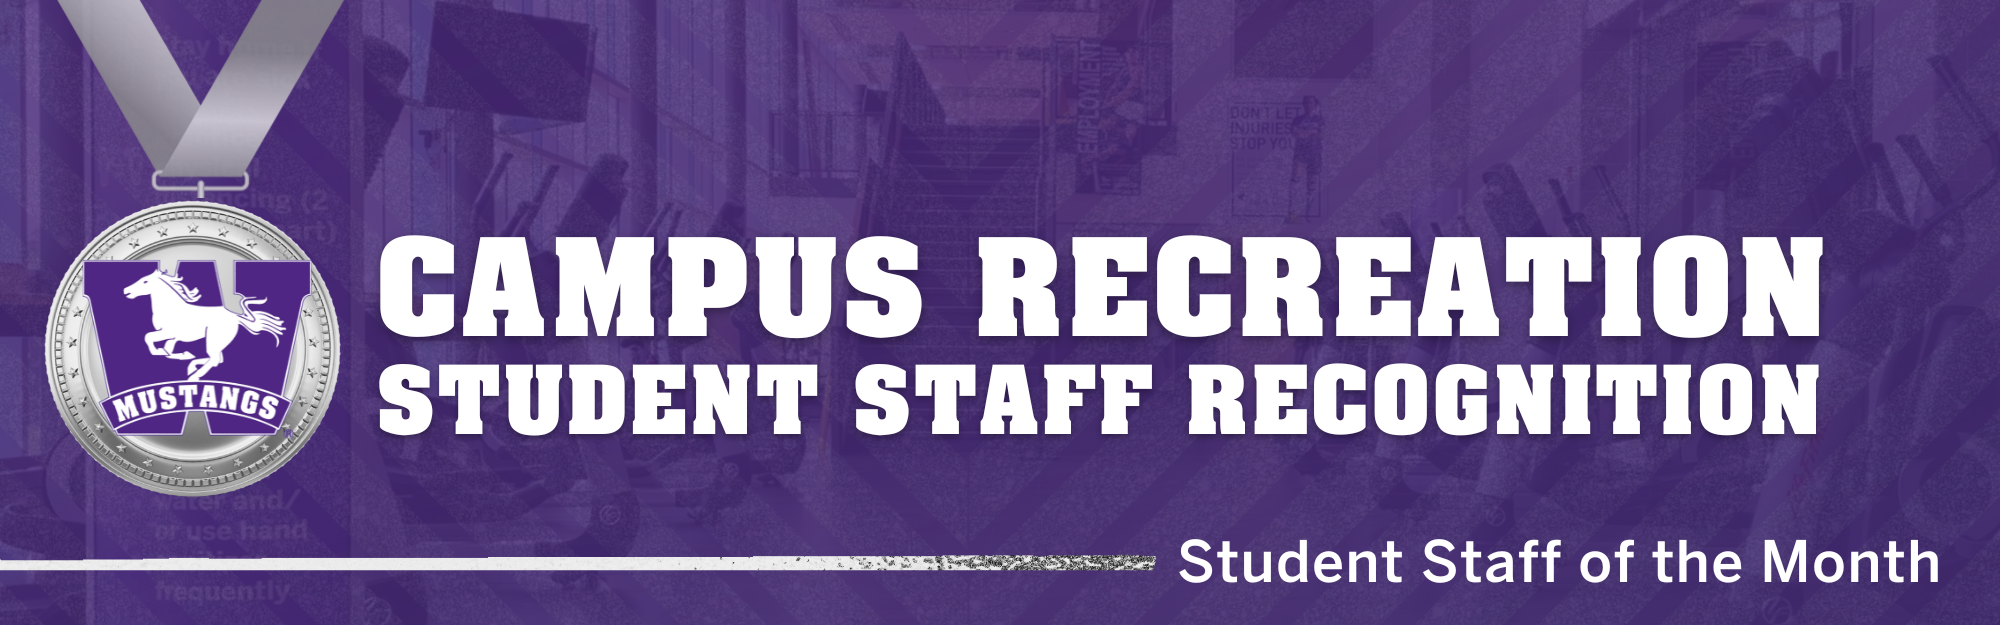 Purple banner that says campus recreation student staff recognition, with a Mustangs silver medal 